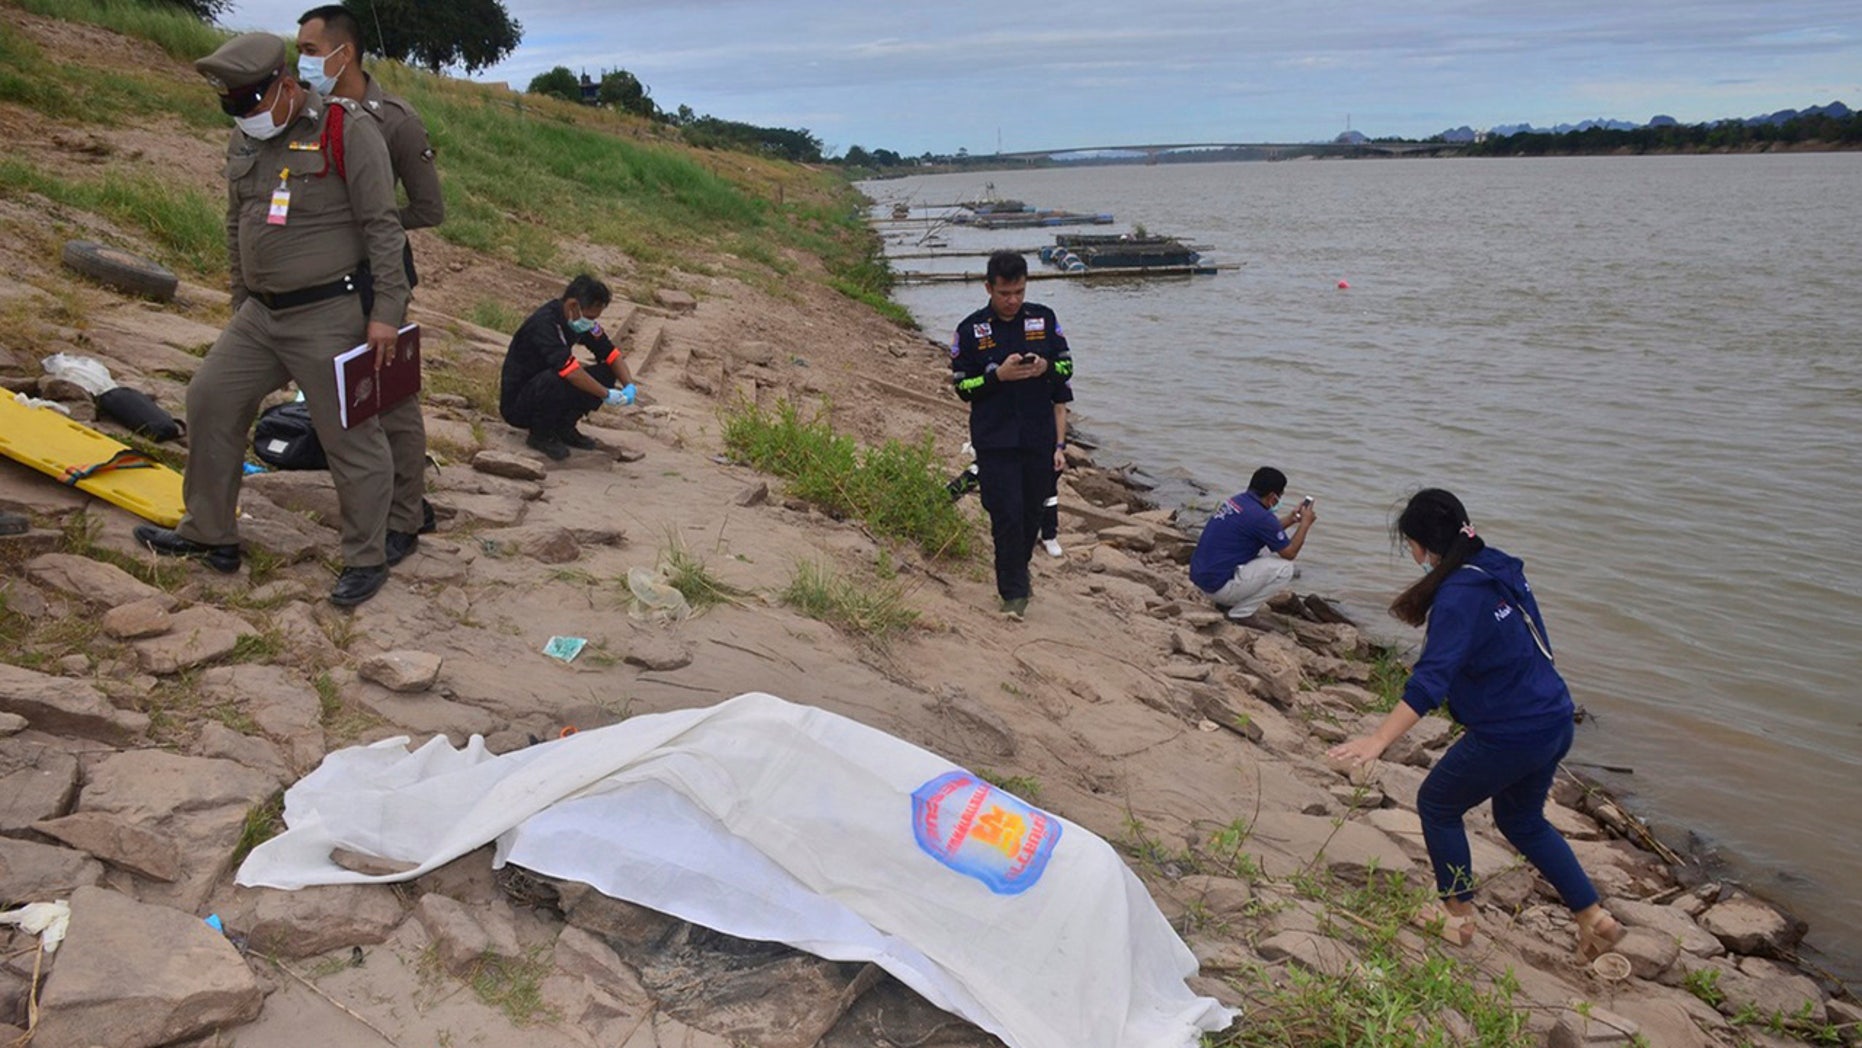 Concrete-filled bodies from Thailand river were missing activists, police say